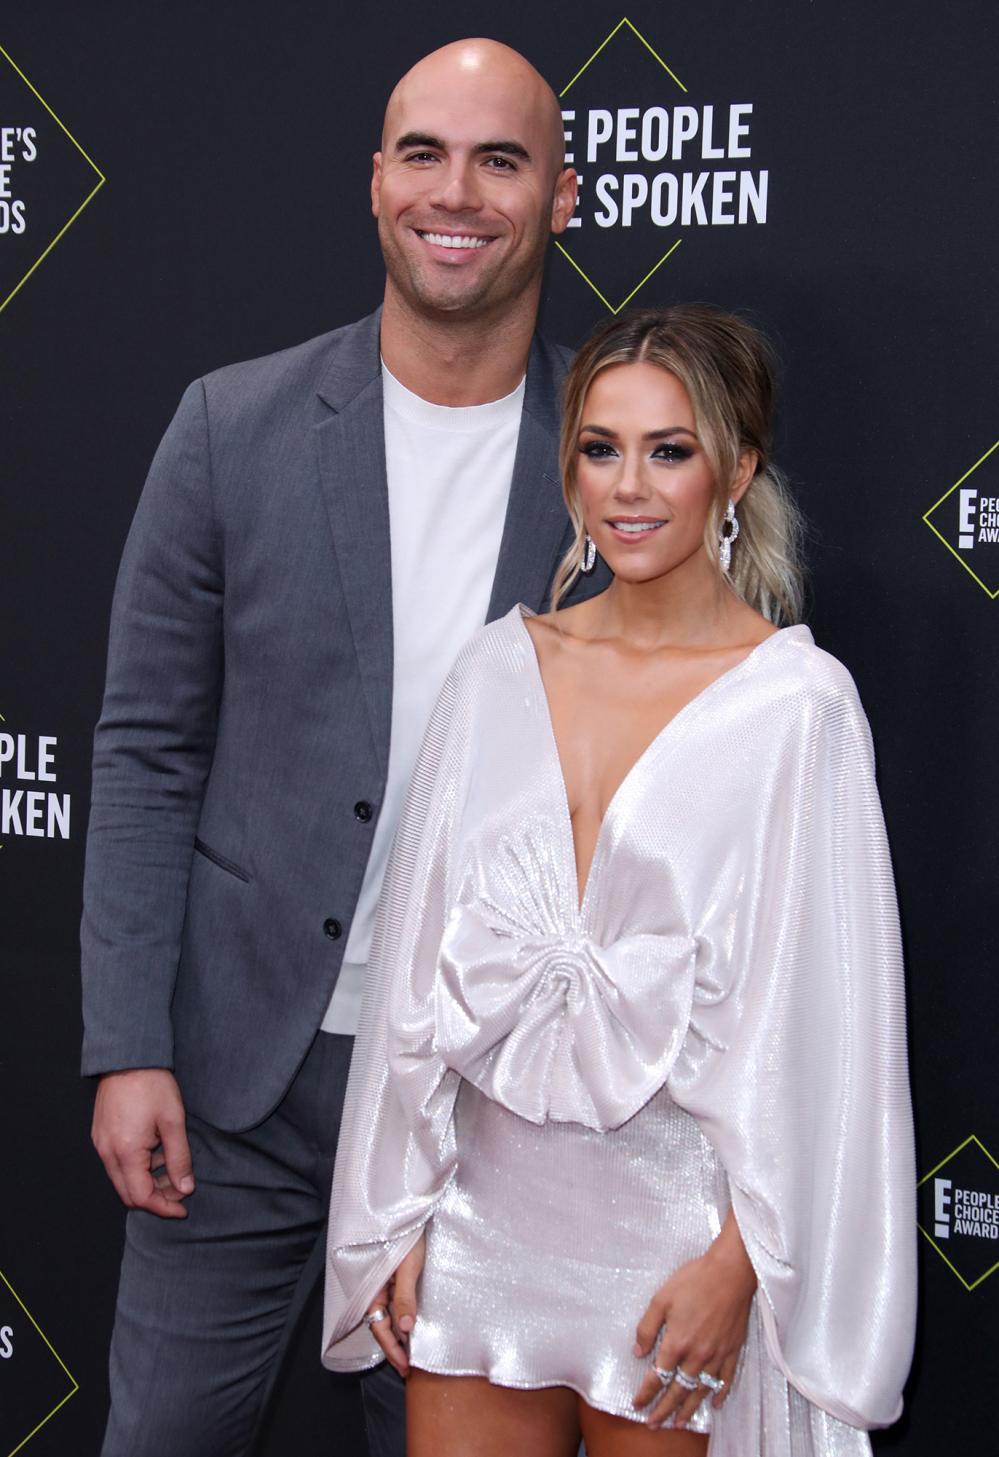 Jana Kramer and Mike Caussin Enjoy Date Night at 2019 People’s Choice Awards